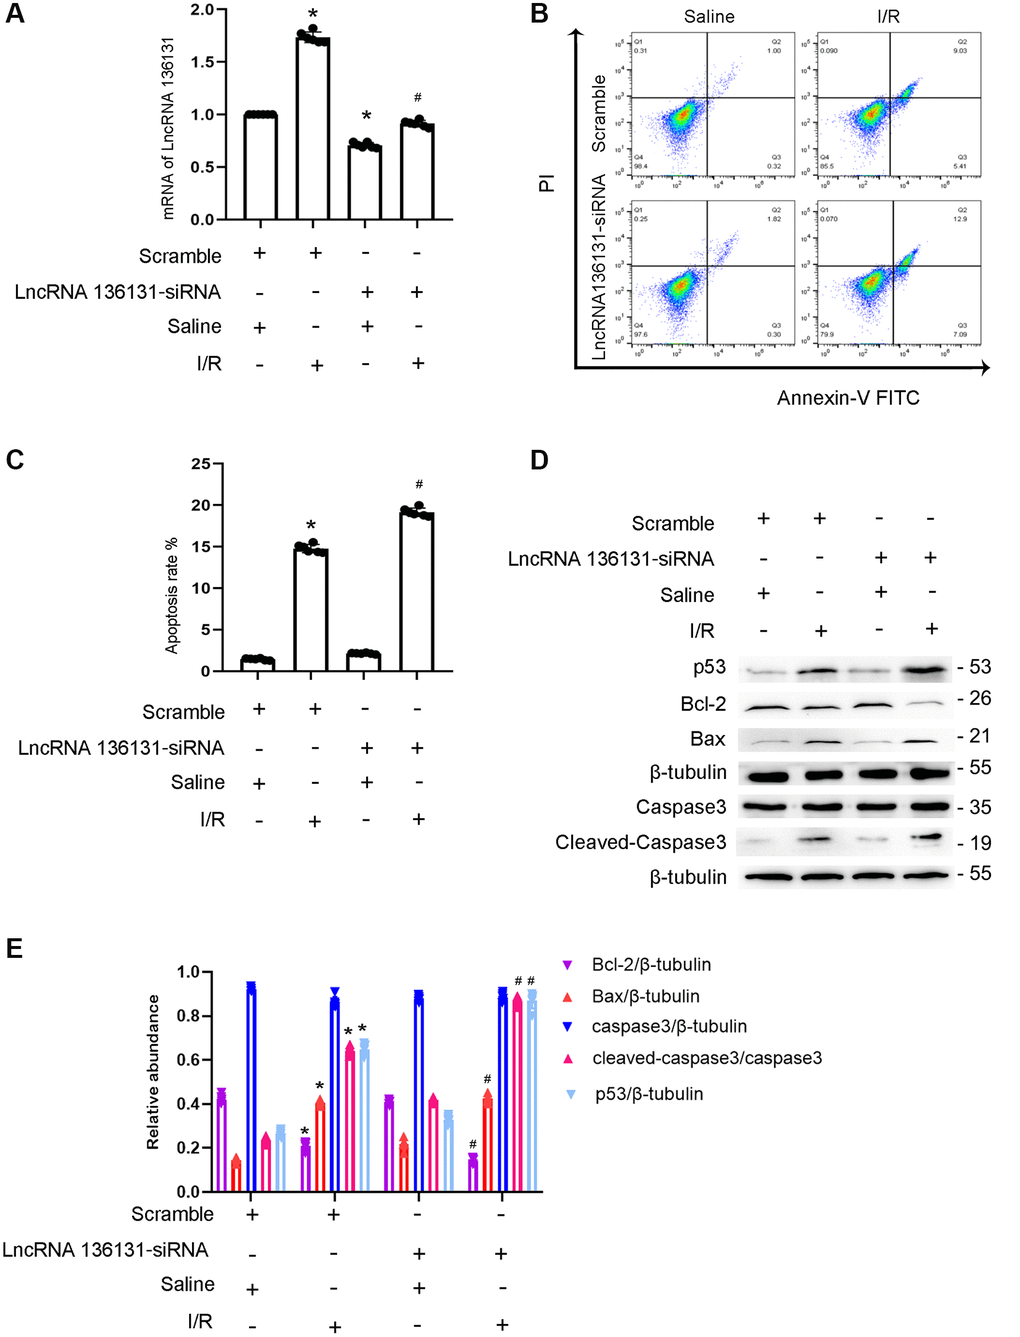 lncRNA136131 knock down aggravated the I/R-induced BUMPT cells apoptosis and the expression of cleaved-caspase3. BUMPT cells were transfected with 100 nM lncRNA136131 siRNA or scramble, and then treated with or without I(2 hours)/R(2 hours) injury. (A) RT-qPCR analysis of the expression of lncRNA136131. (B) FCM analysis of BUMPT cells apoptosis. (C) Analysis of apoptosis rate (%). (D) The immunoblot analysis of caspase 3, cleaved-caspase3, Bax, p53 and Blc-2. (E) The gray analysis between them. Data are expressed as mean ± SD (n = 6). *p #p 